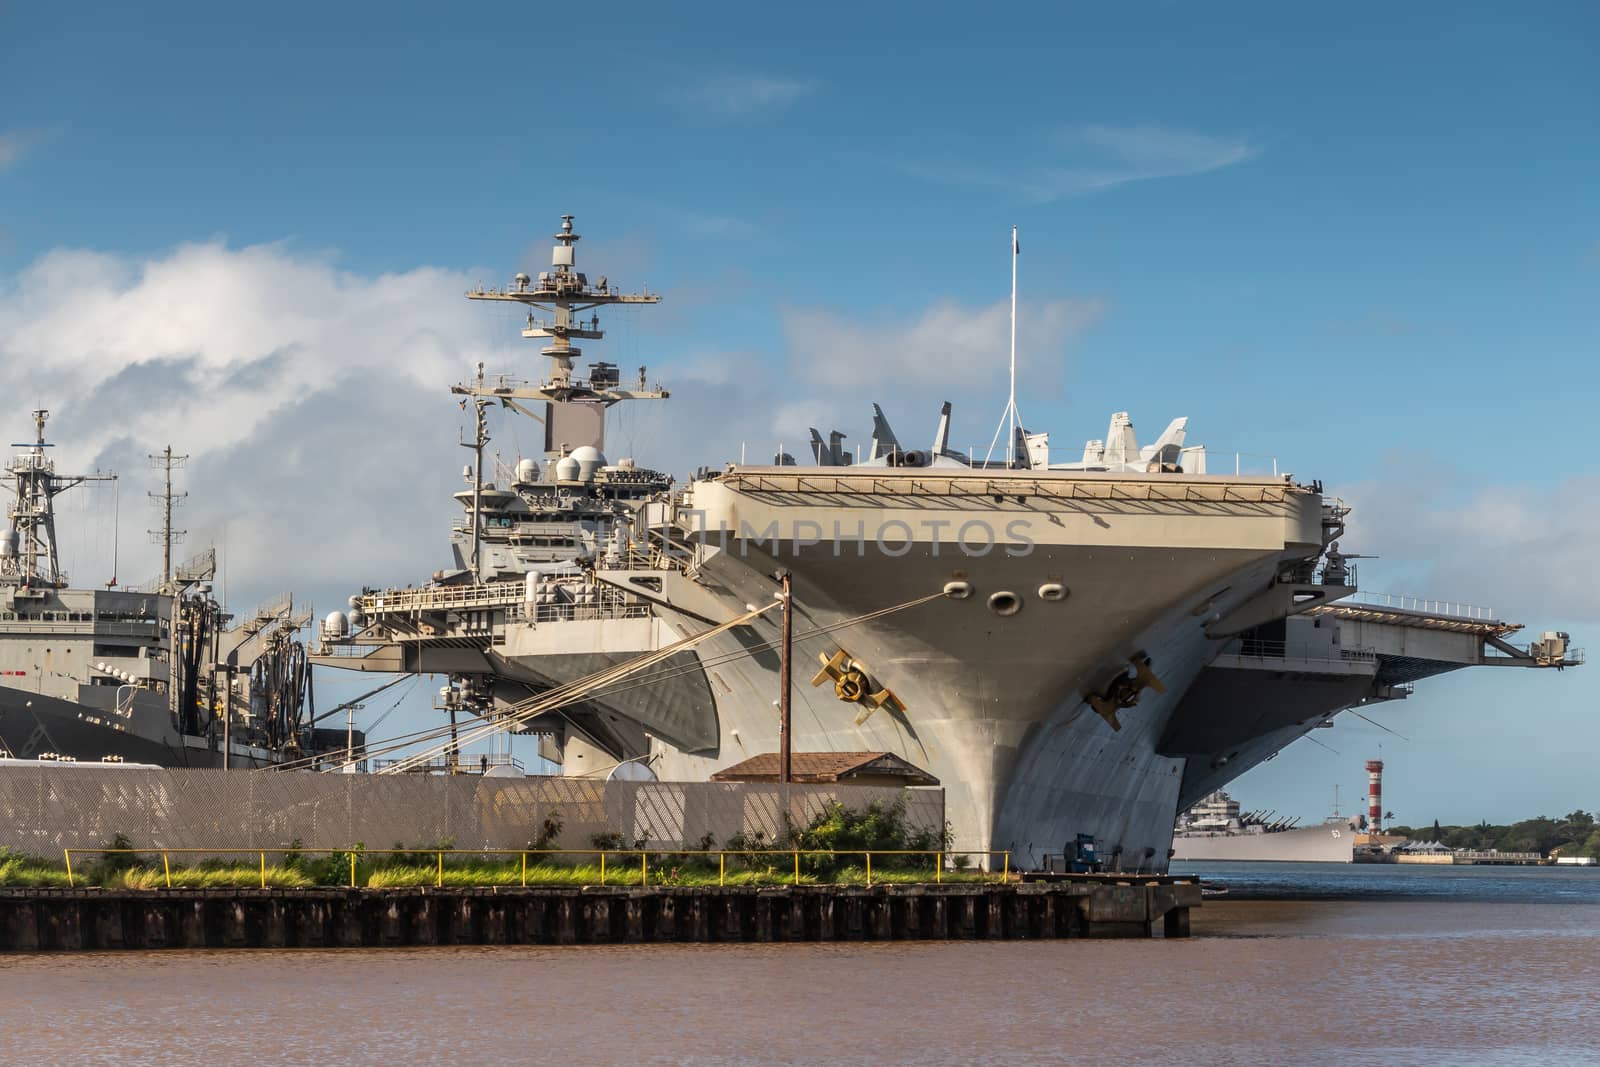 Oahu, Hawaii, USA. - January 10, 2020: Pearl Harbor. Bow of Gray Abraham Lincoln aircraft carrier docked under blue cloudscape on top of brown water.